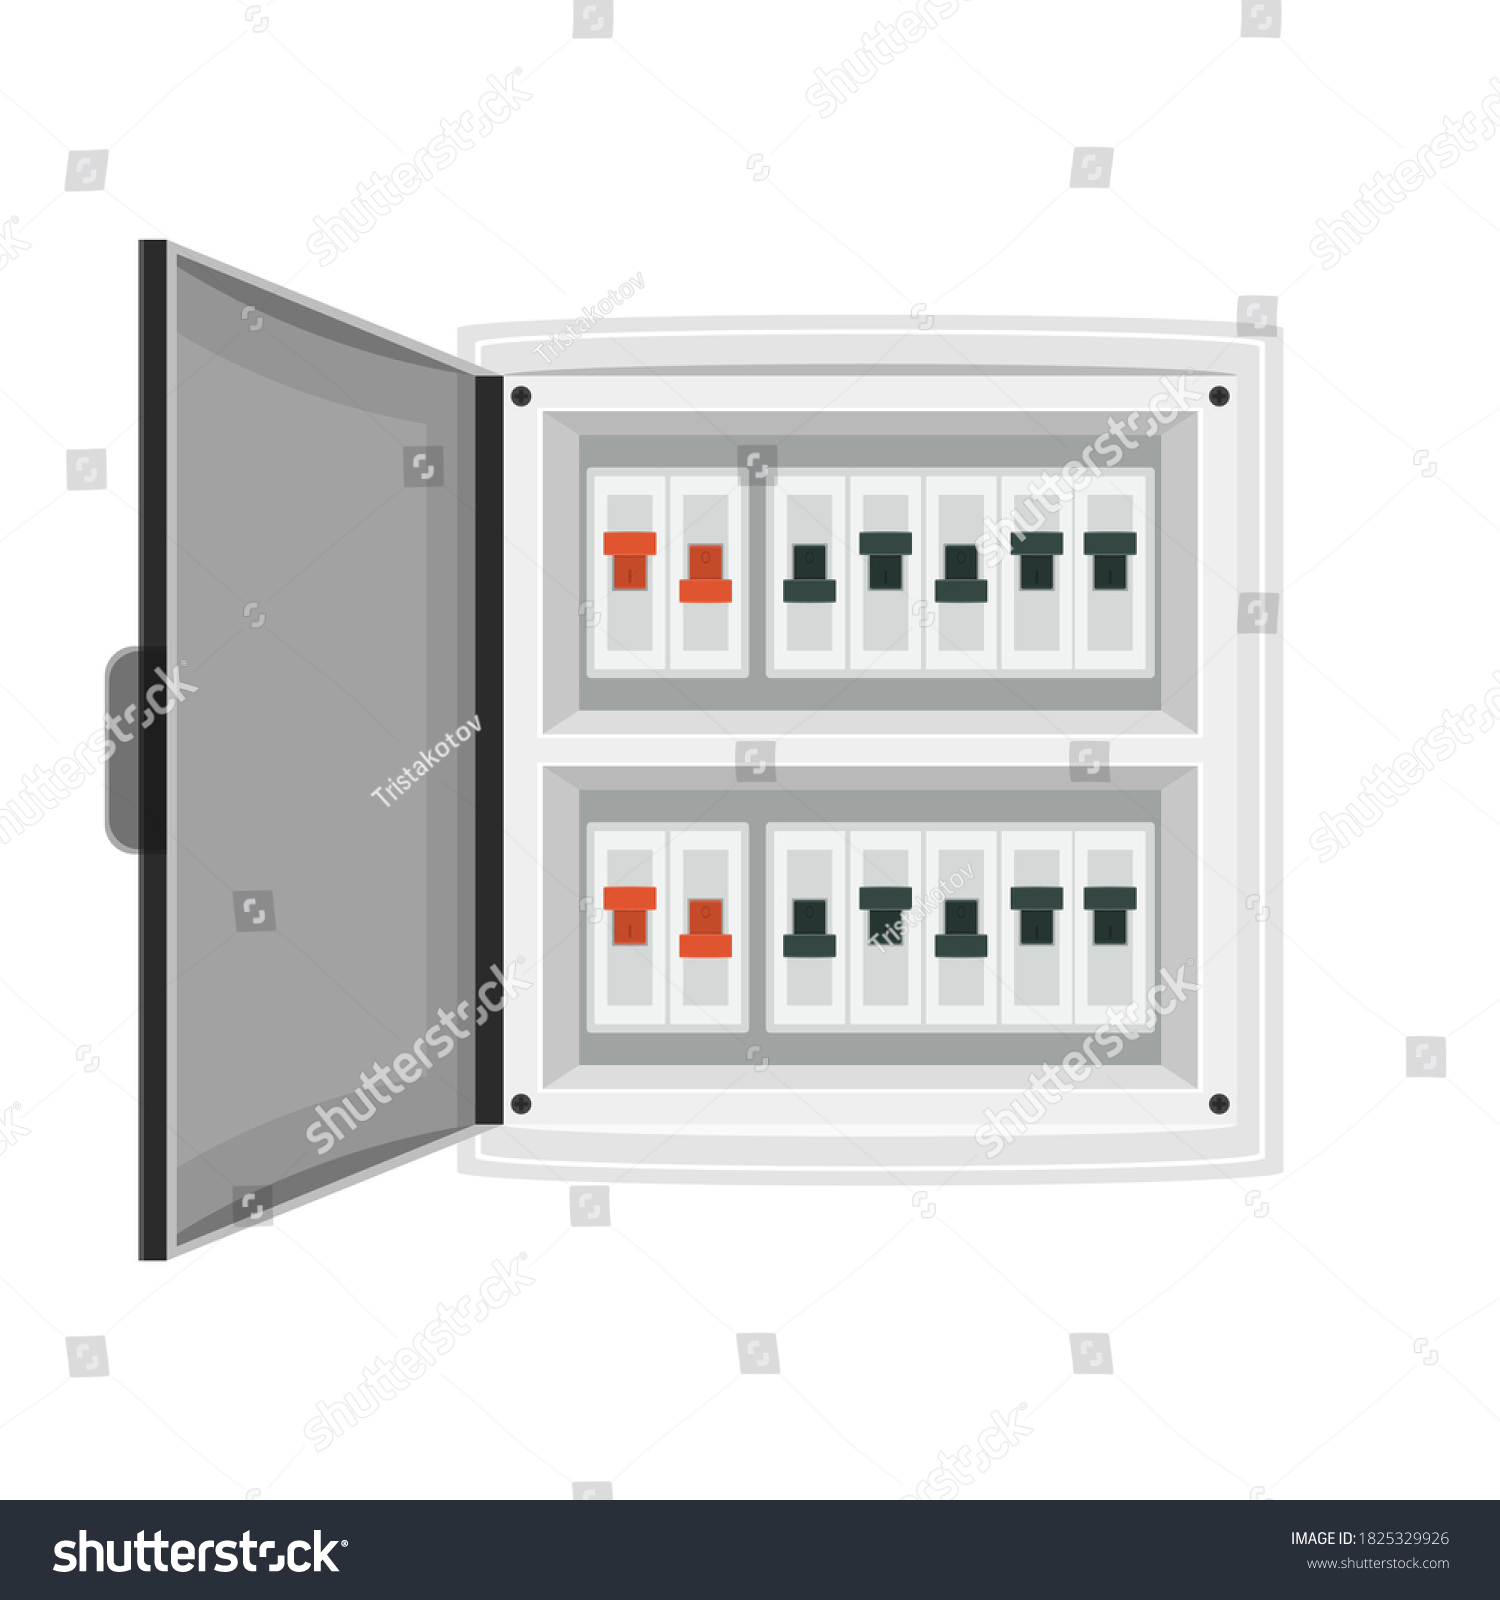 SVG of Fuse board box. Electrical power switch panel. Electricity equipment. Vector EPS 10. svg